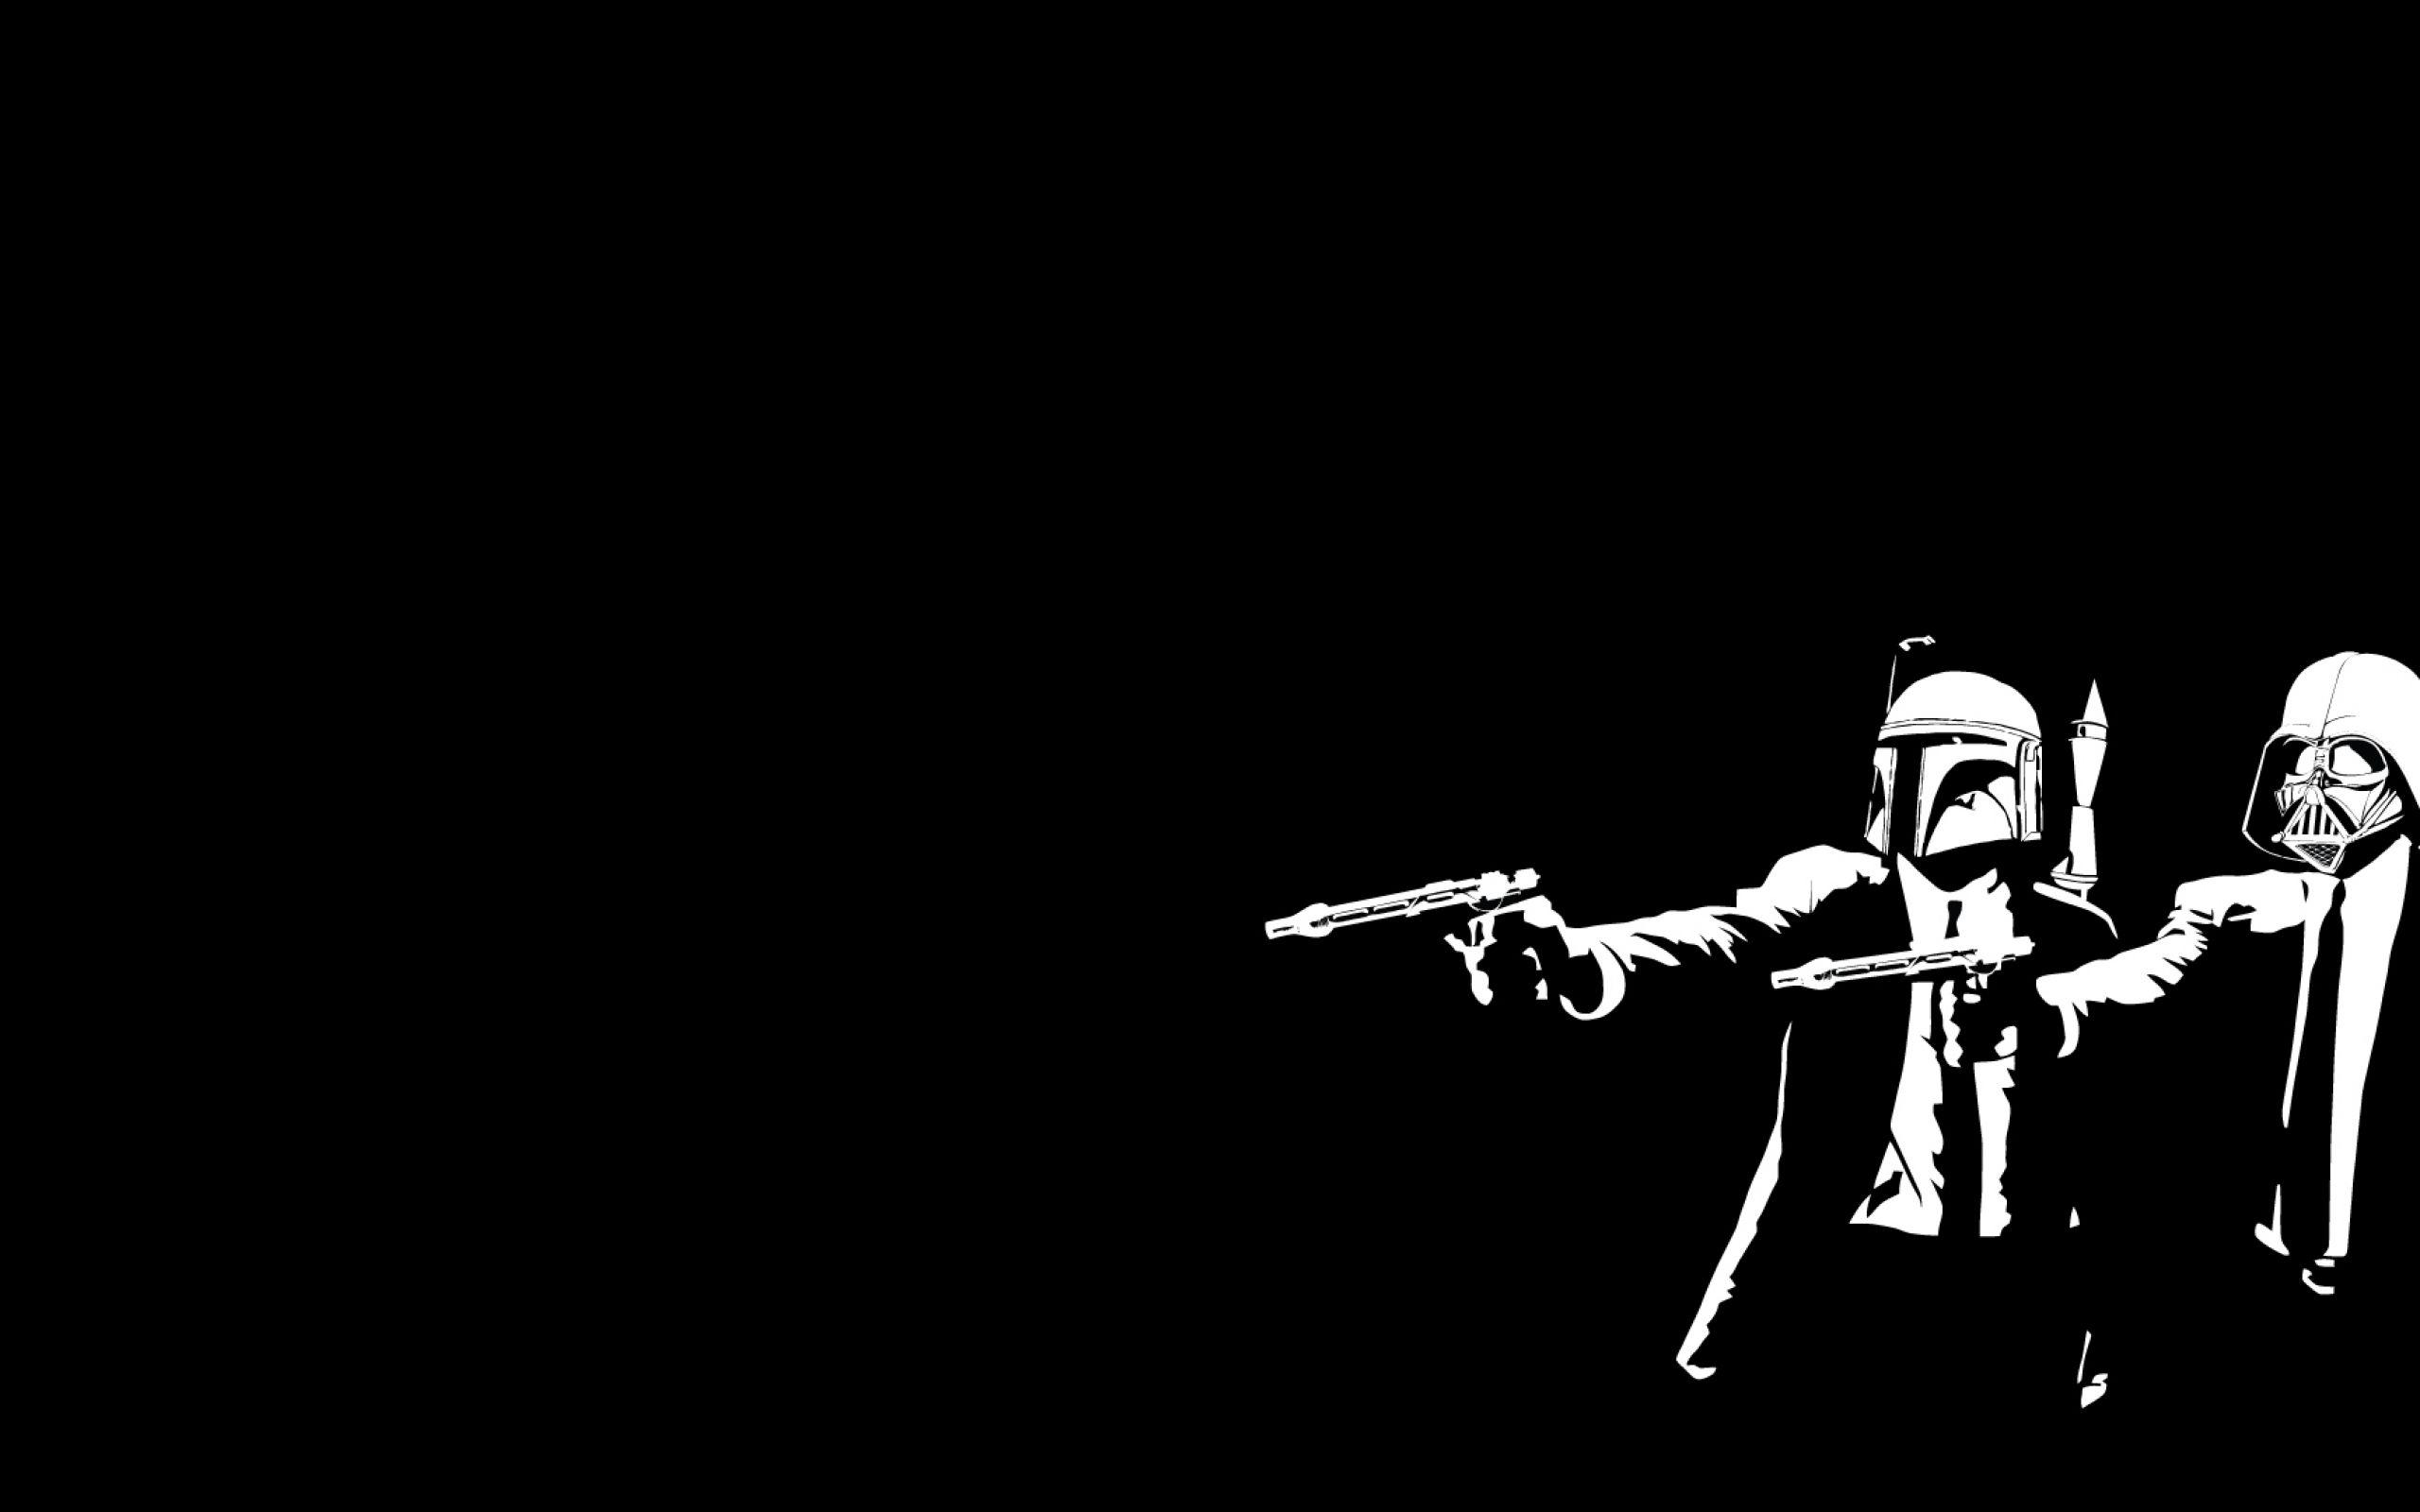 Star Wars Pulp Fiction Wallpapers Top Free Star Wars Pulp Fiction Backgrounds Wallpaperaccess